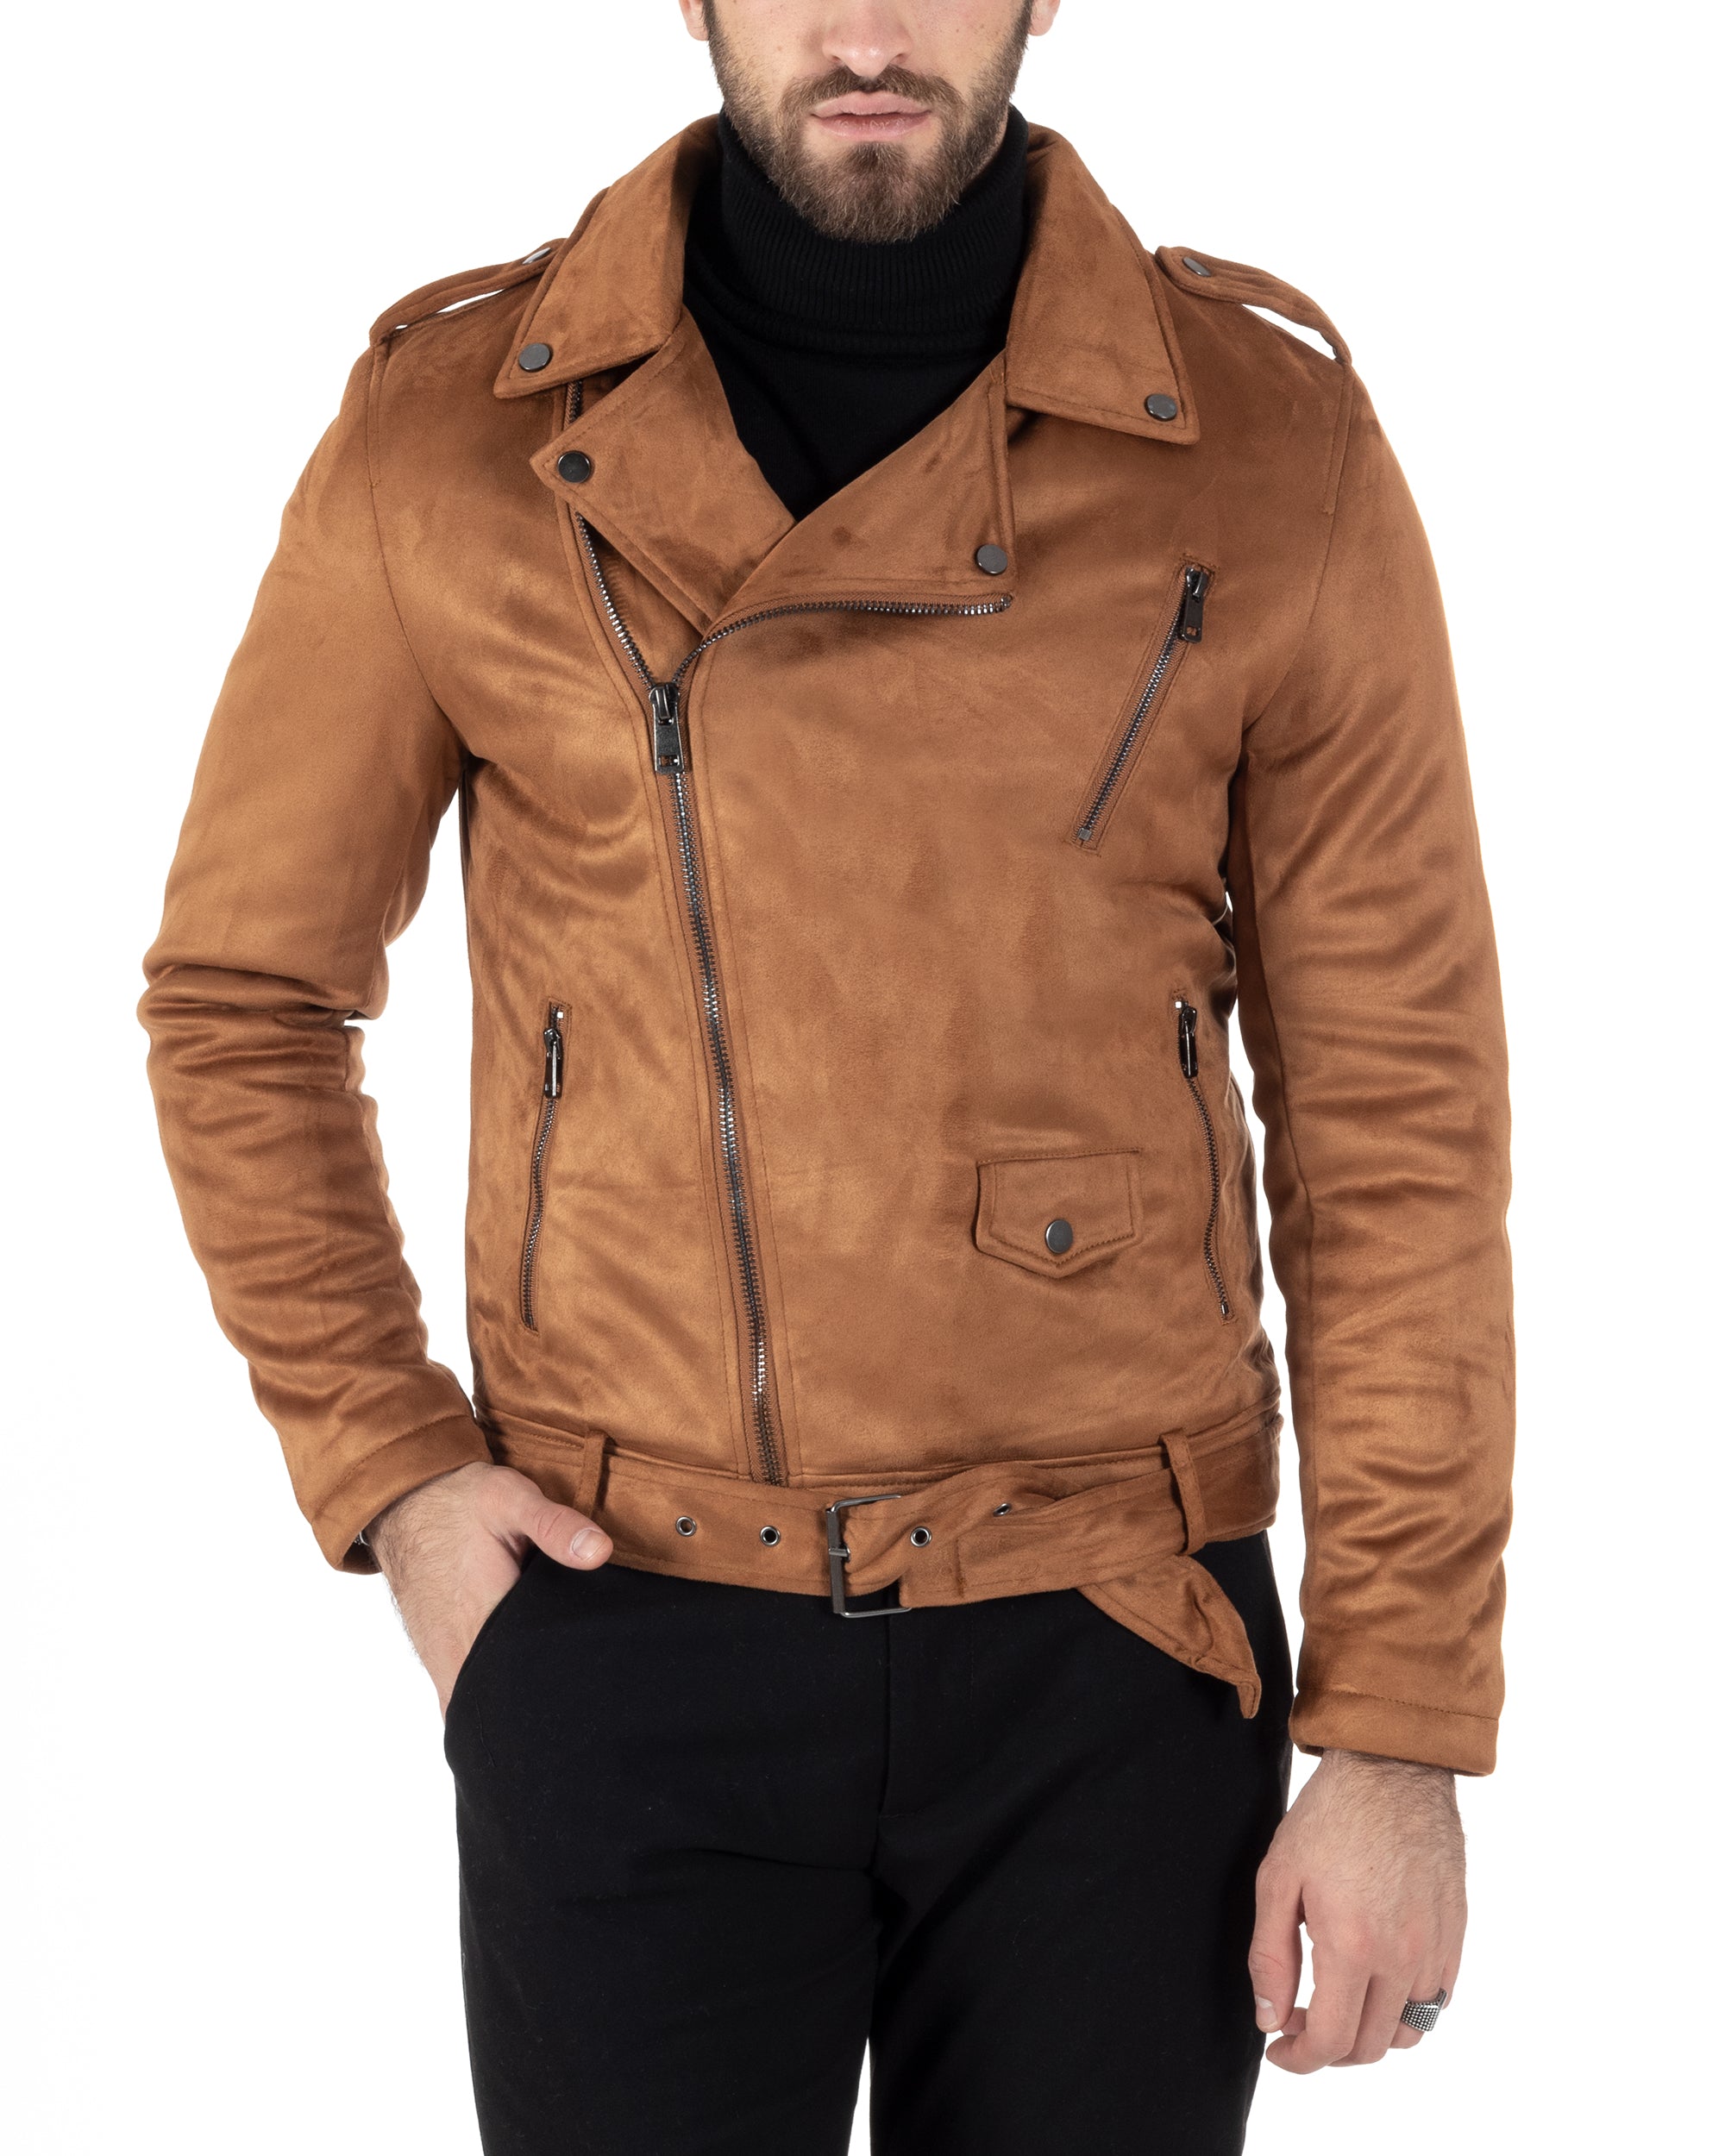 Men's Camel Jacket Solid Color Long Sleeves Suede Studded GIOSAL